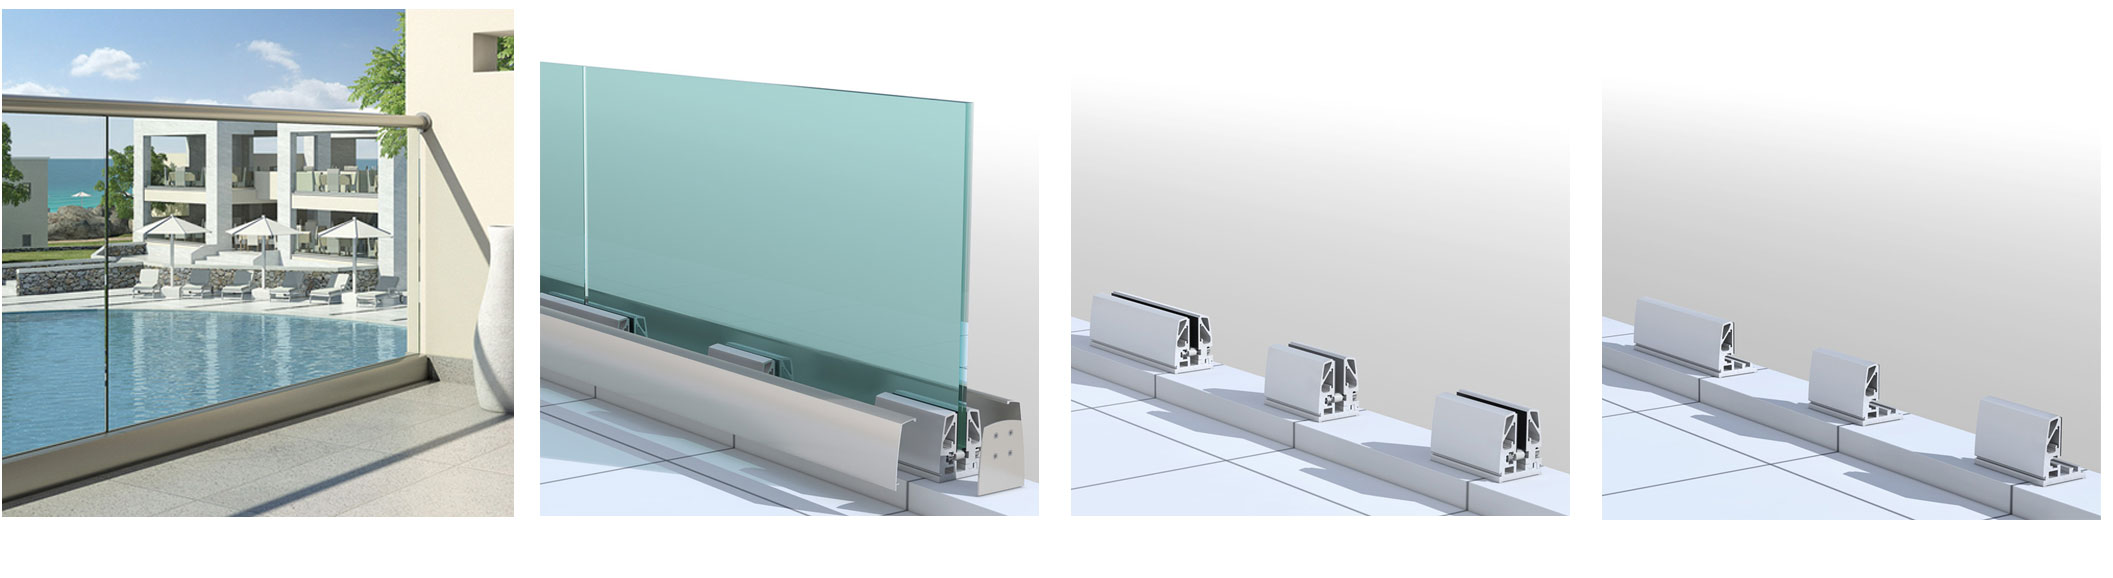 A Line On-floor glass supporting system